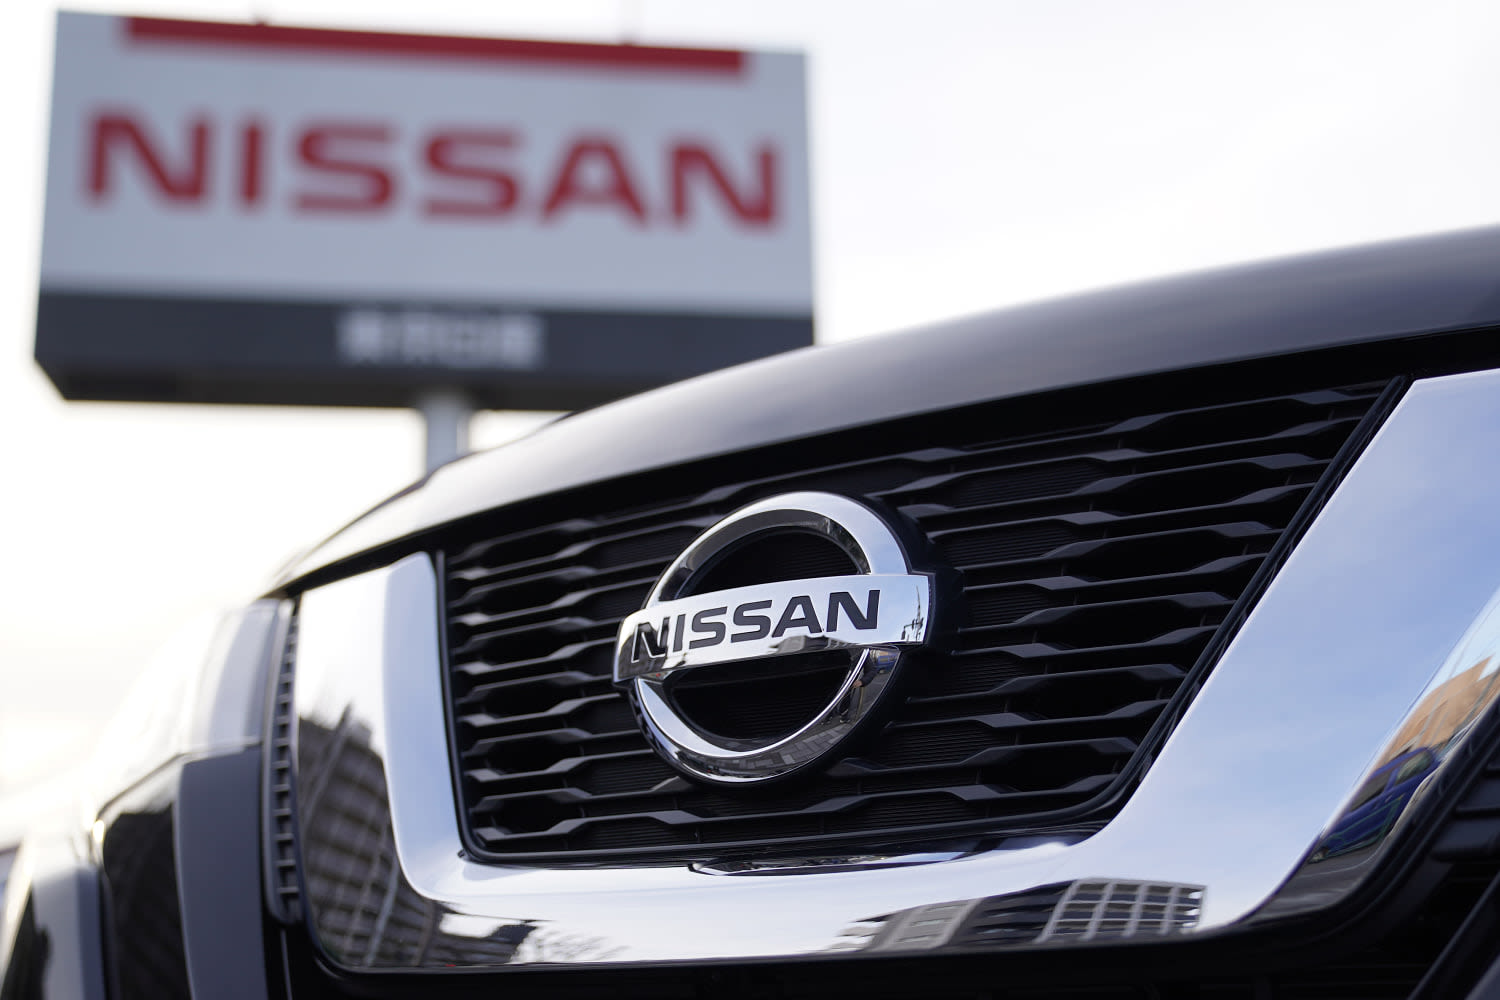 Nissan issues 'do not drive' warning for 84,000 older-model vehicles over Takata air bags